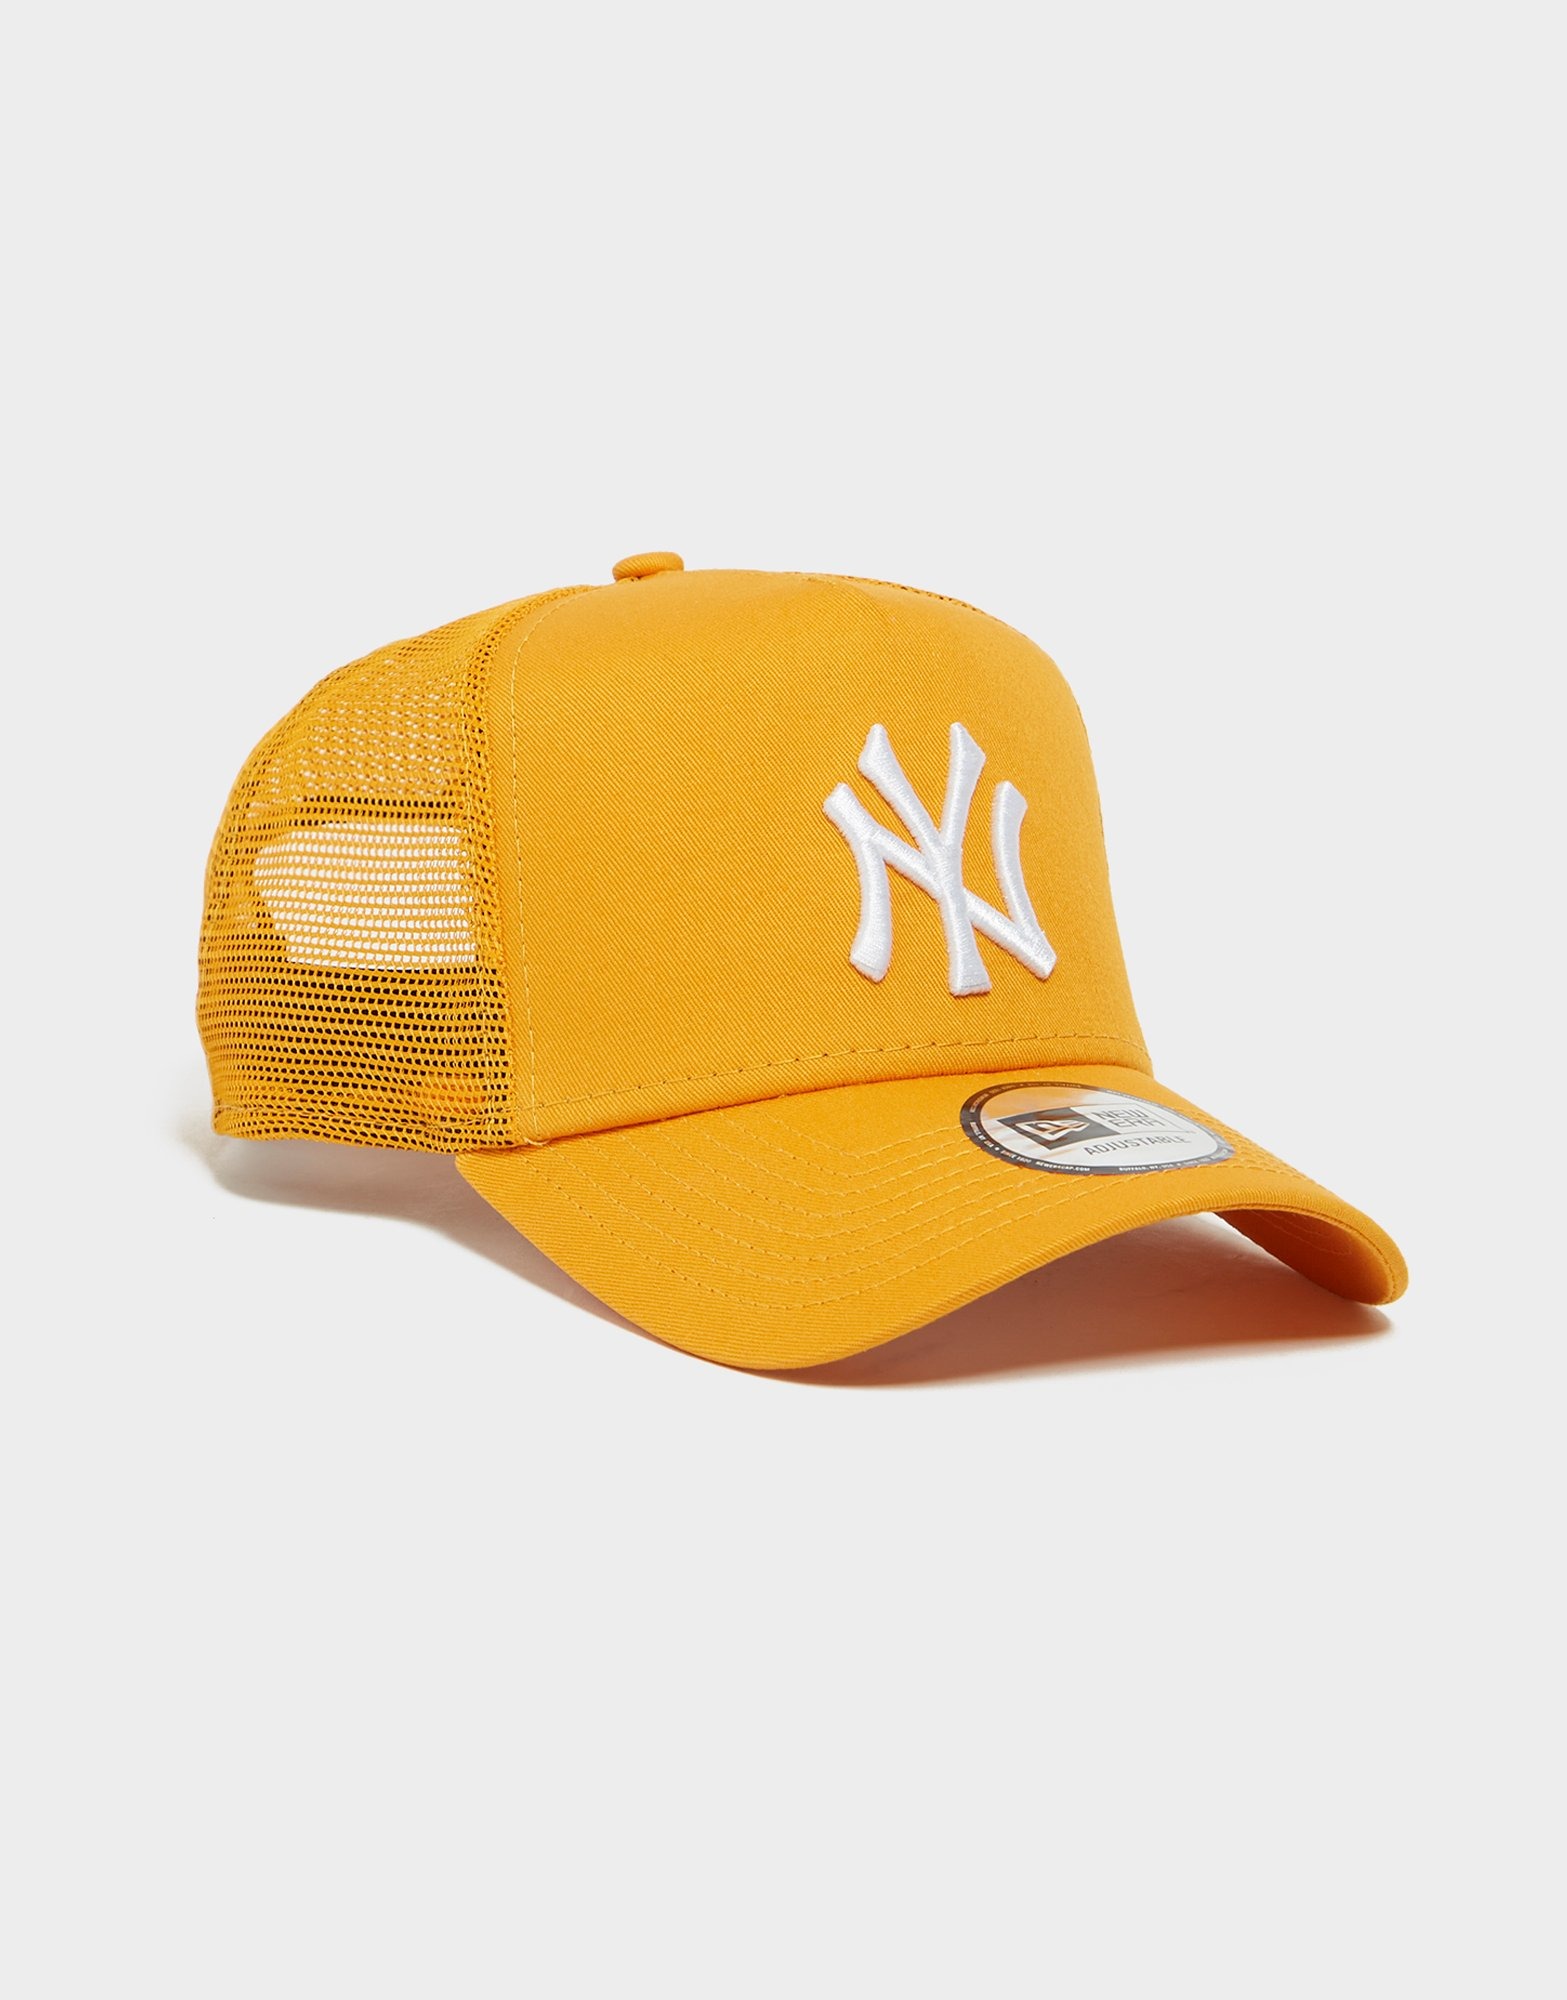 MLB Orange Crush 59Fifty Fitted Hat Collection by MLB x New Era